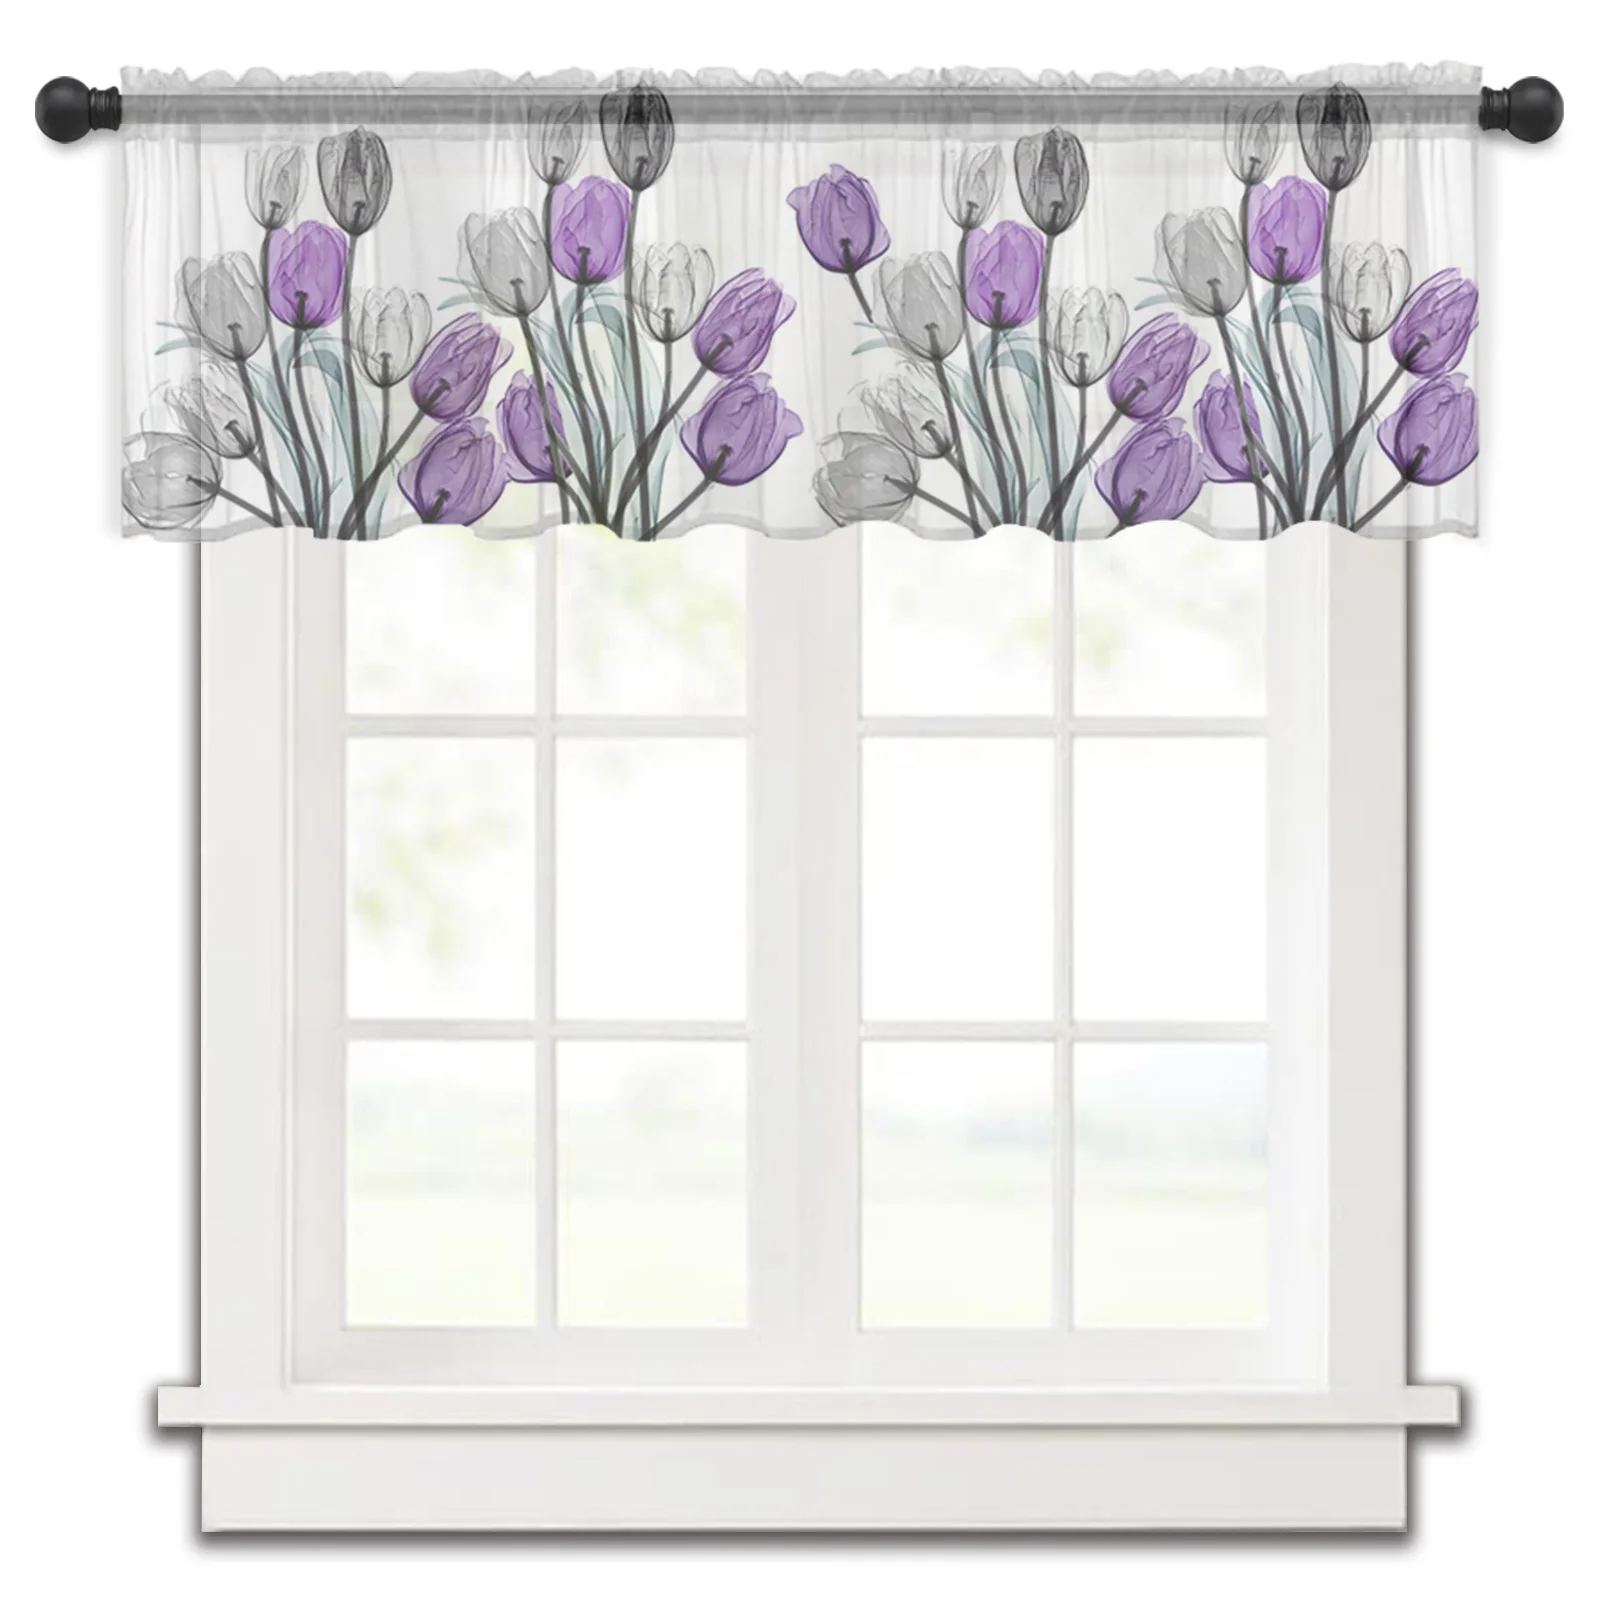 

Flower Idyllic Grey Purple Tulip Kitchen Small Curtain Tulle Sheer Short Curtain Bedroom Living Room Home Decor Voile Drapes